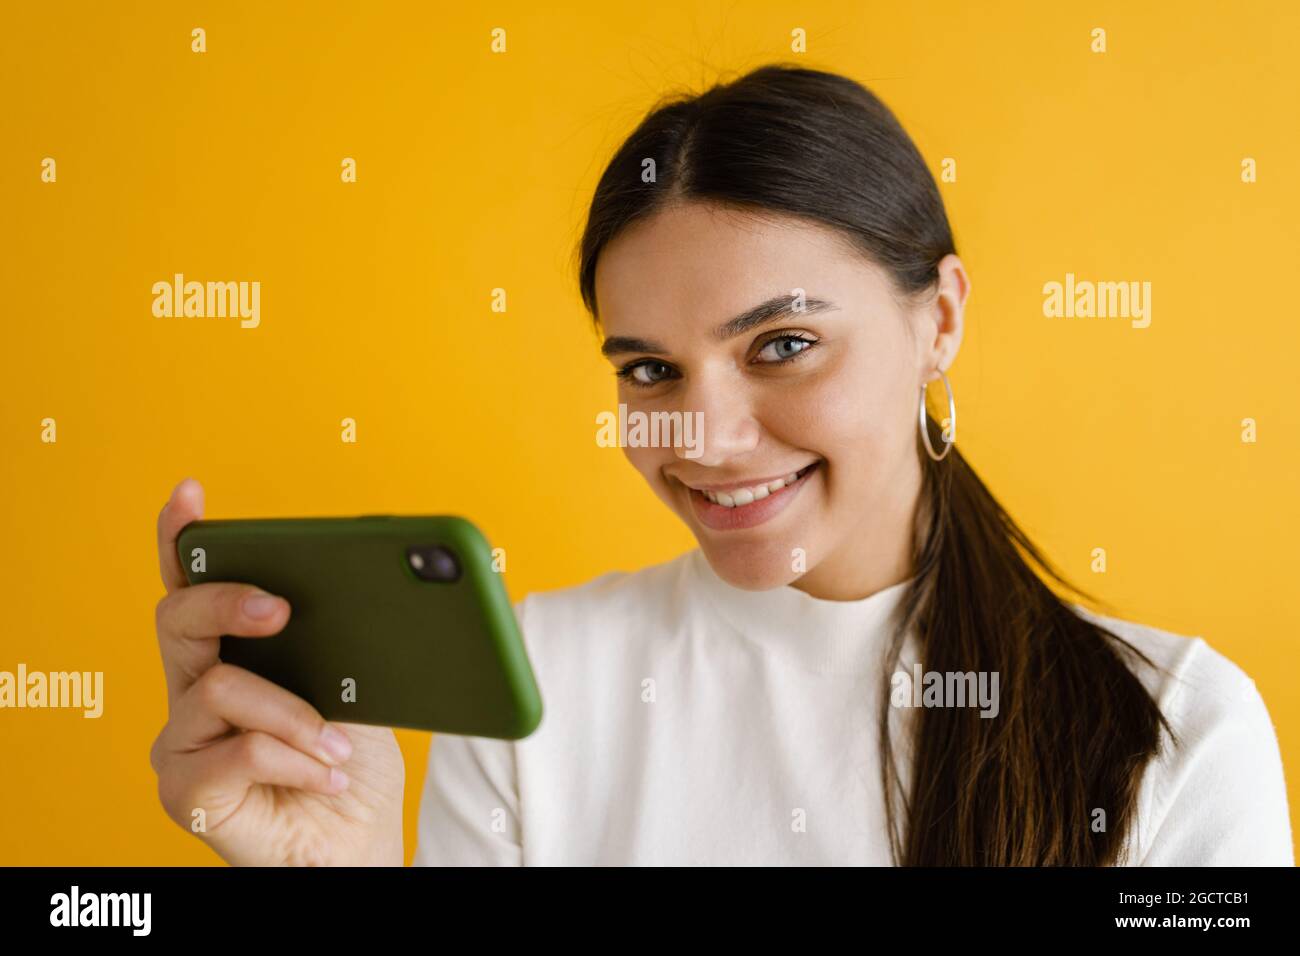 Young brunette woman smiling and using mobile phone isolated over yellow background Stock Photo